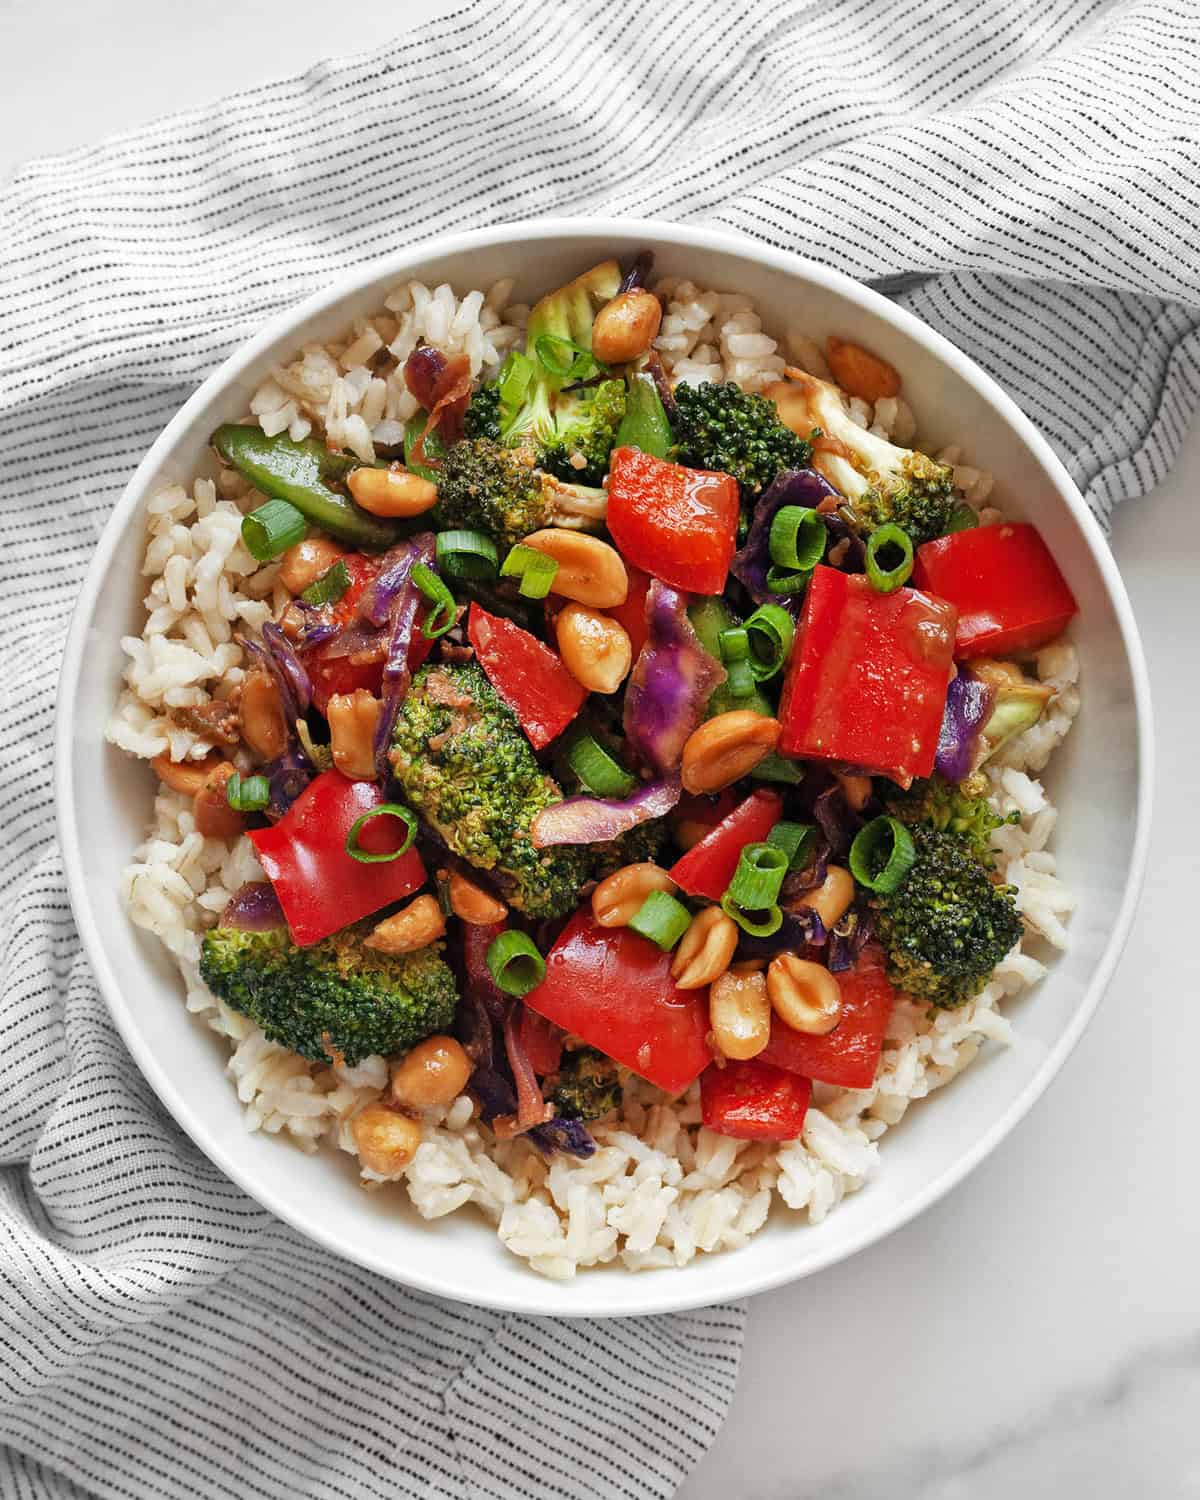 Easy veggie stir-fry in a bowl with brown rice.